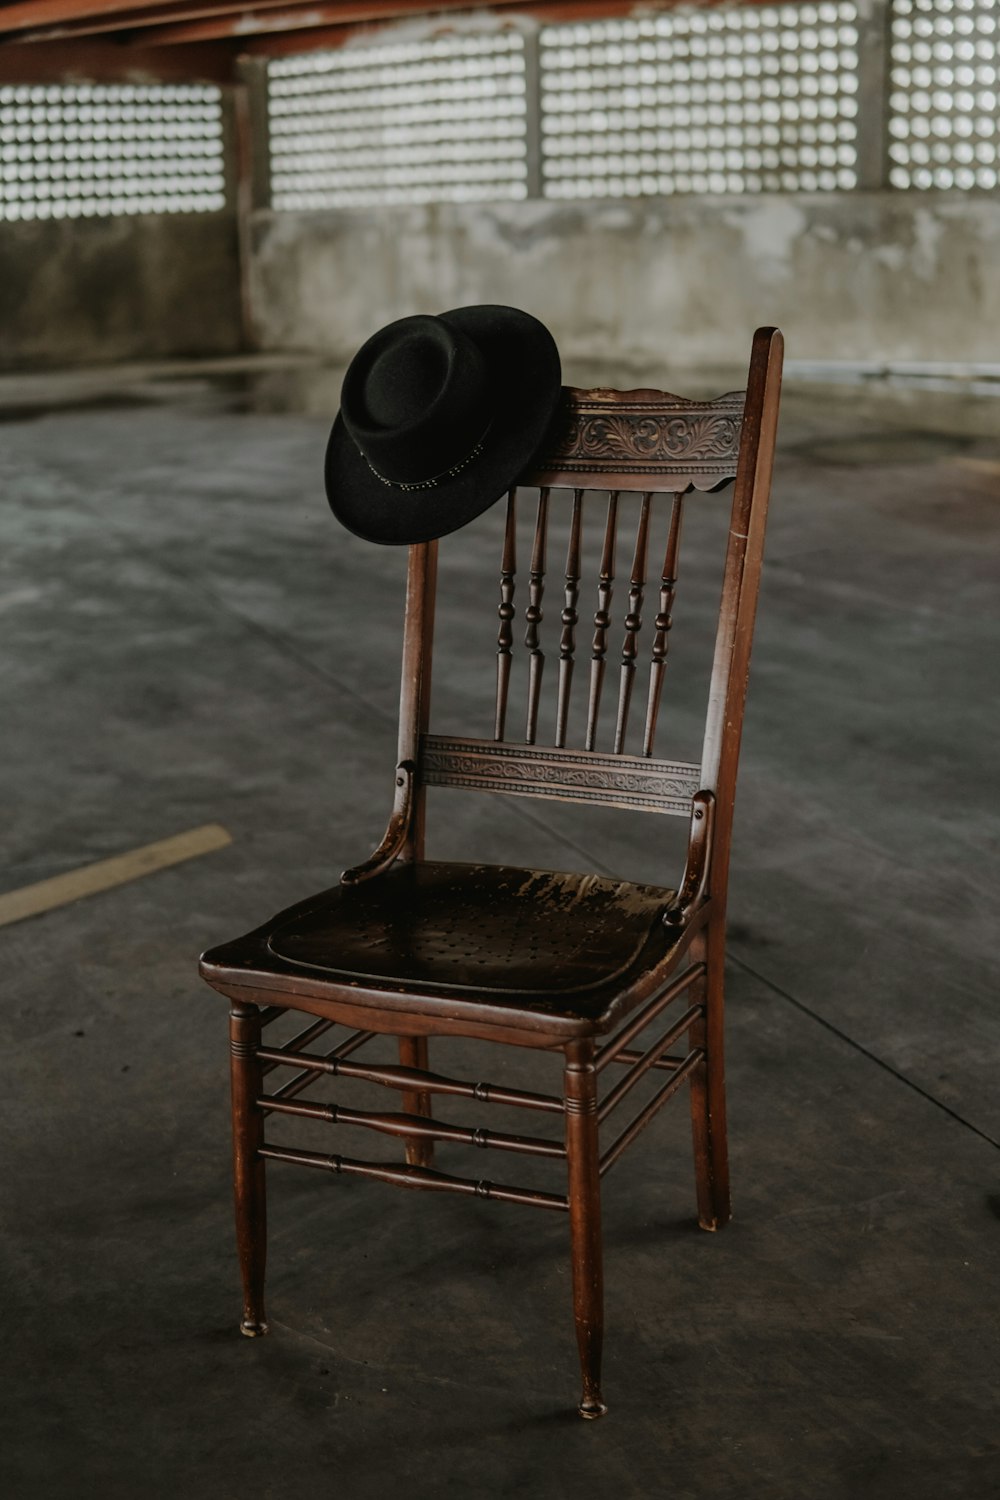 black hat on brown wooden chair